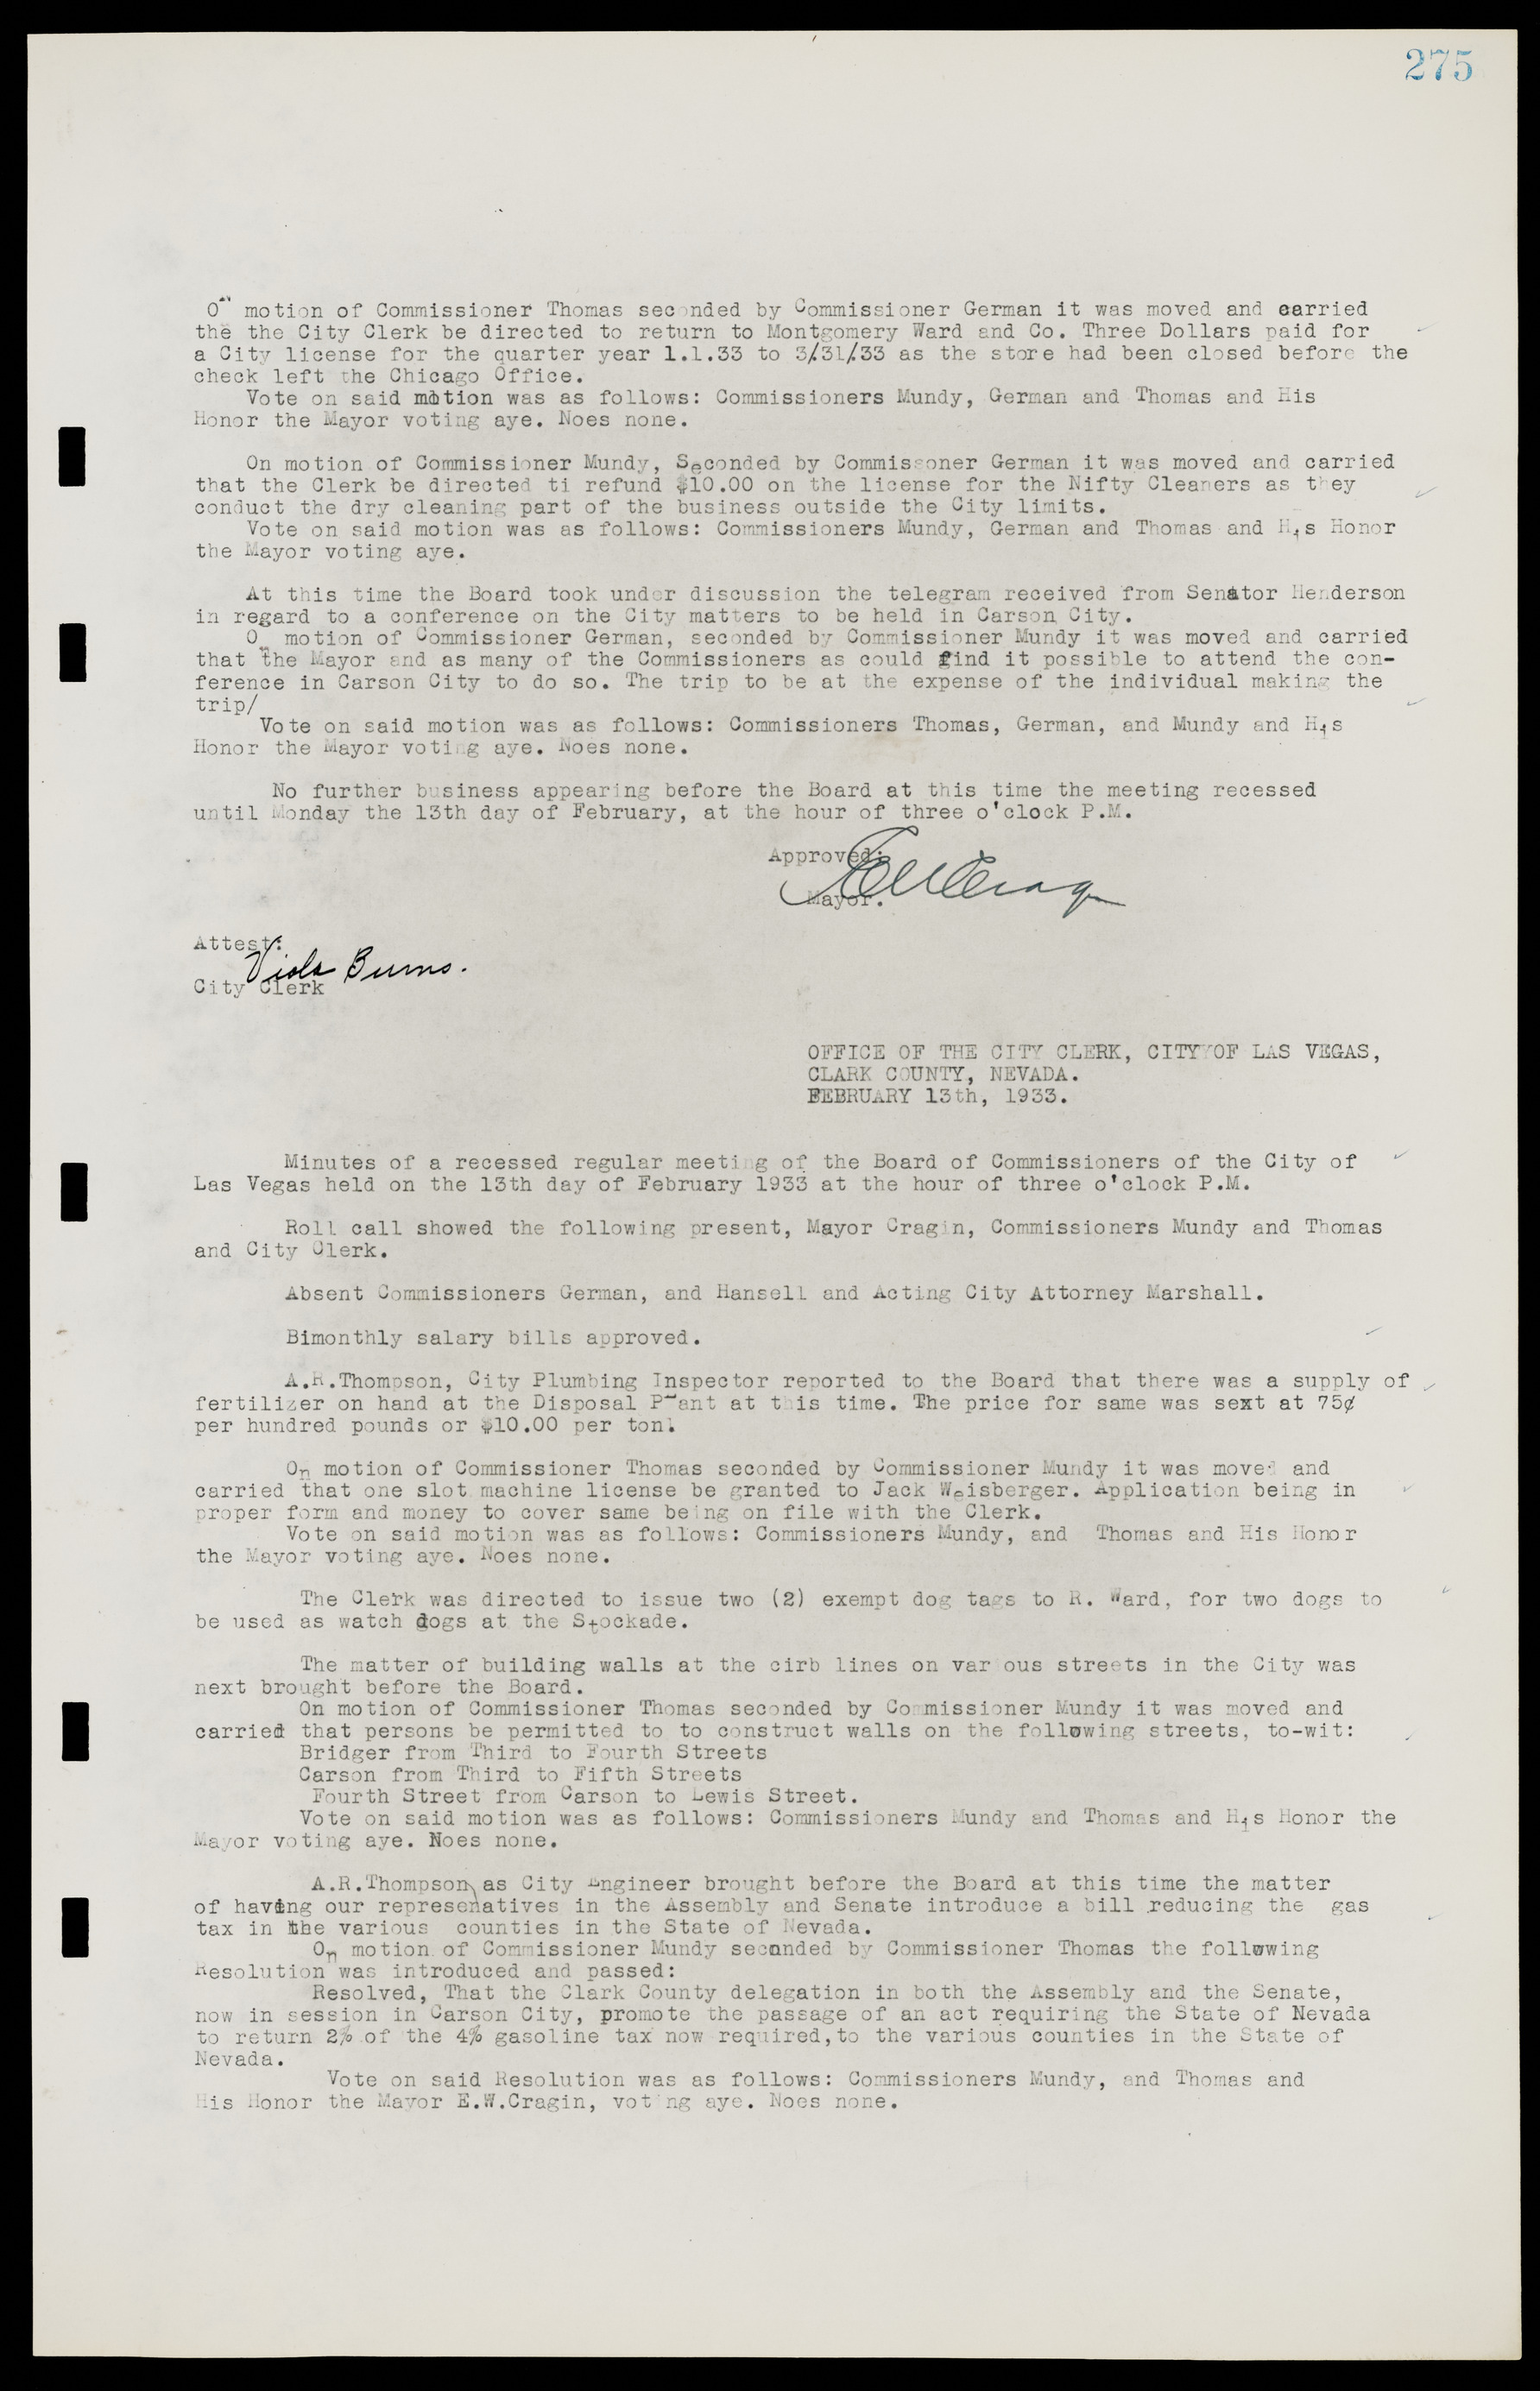 Las Vegas City Commission Minutes, May 14, 1929 to February 11, 1937, lvc000003-281